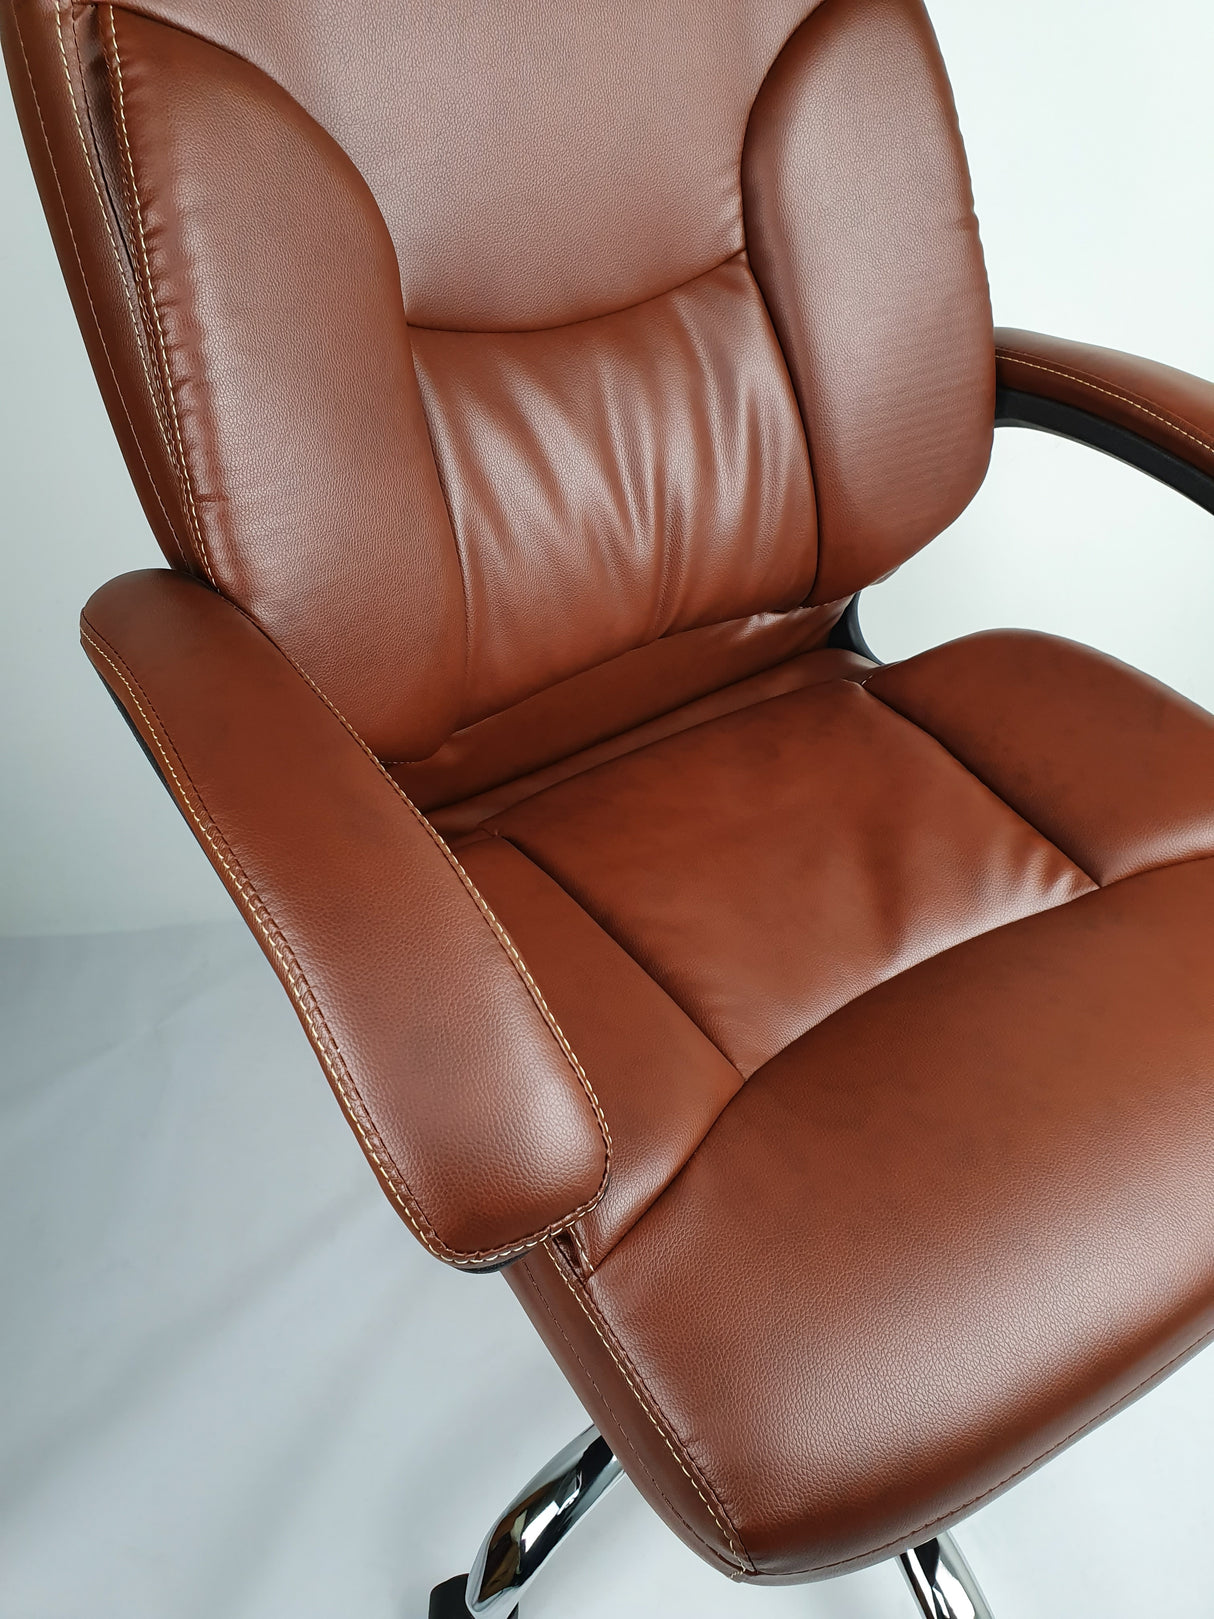 Medium Back Brown Leather Office Chair - HF459-1